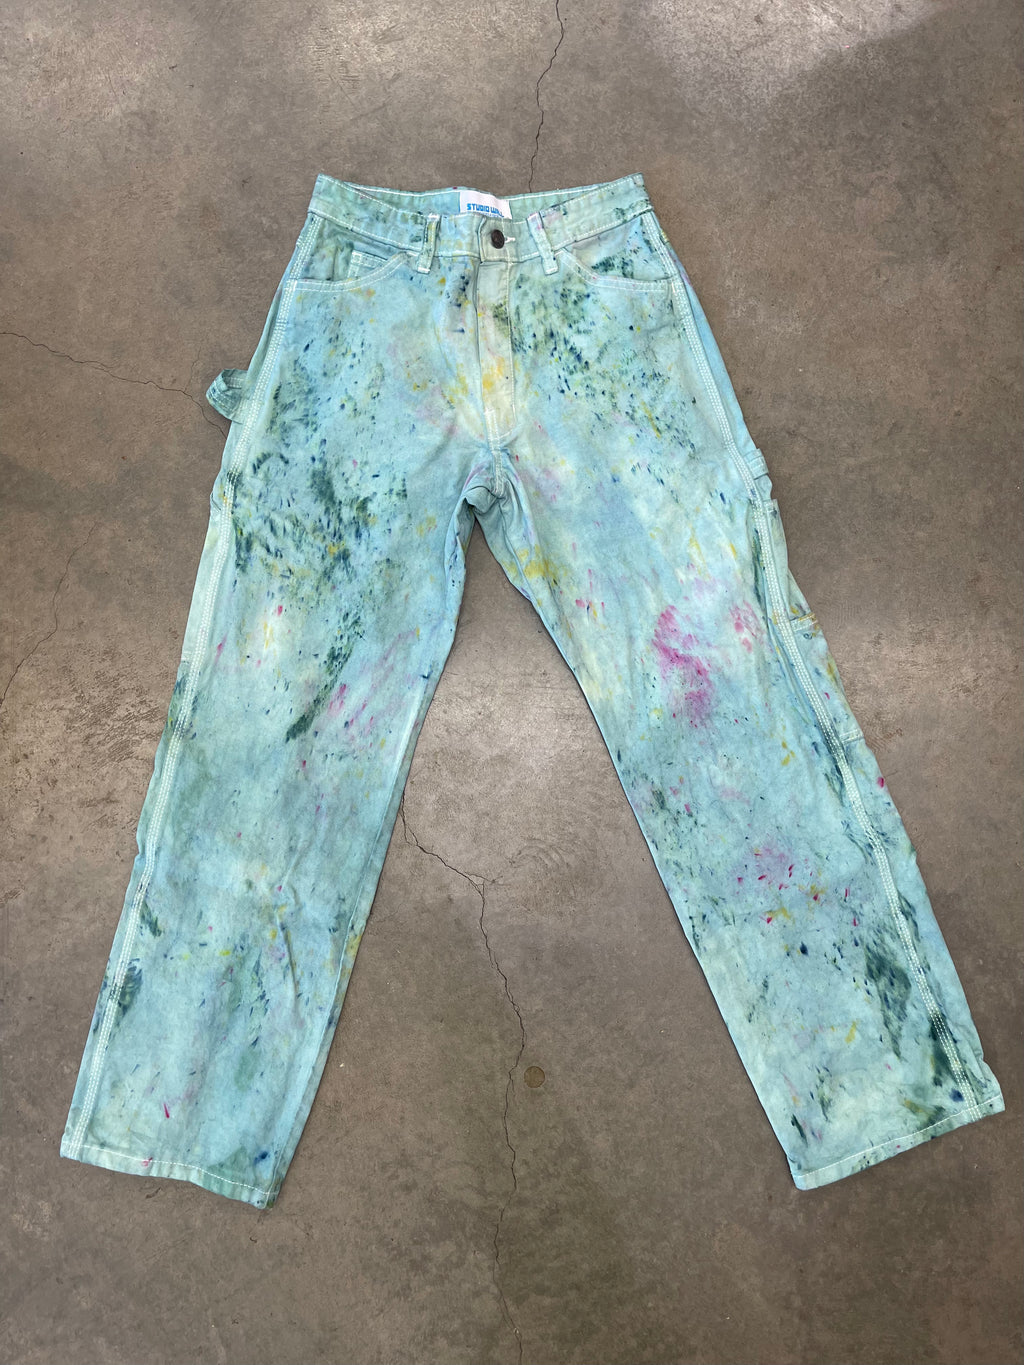 Studio Wall- hand dyed painter pant